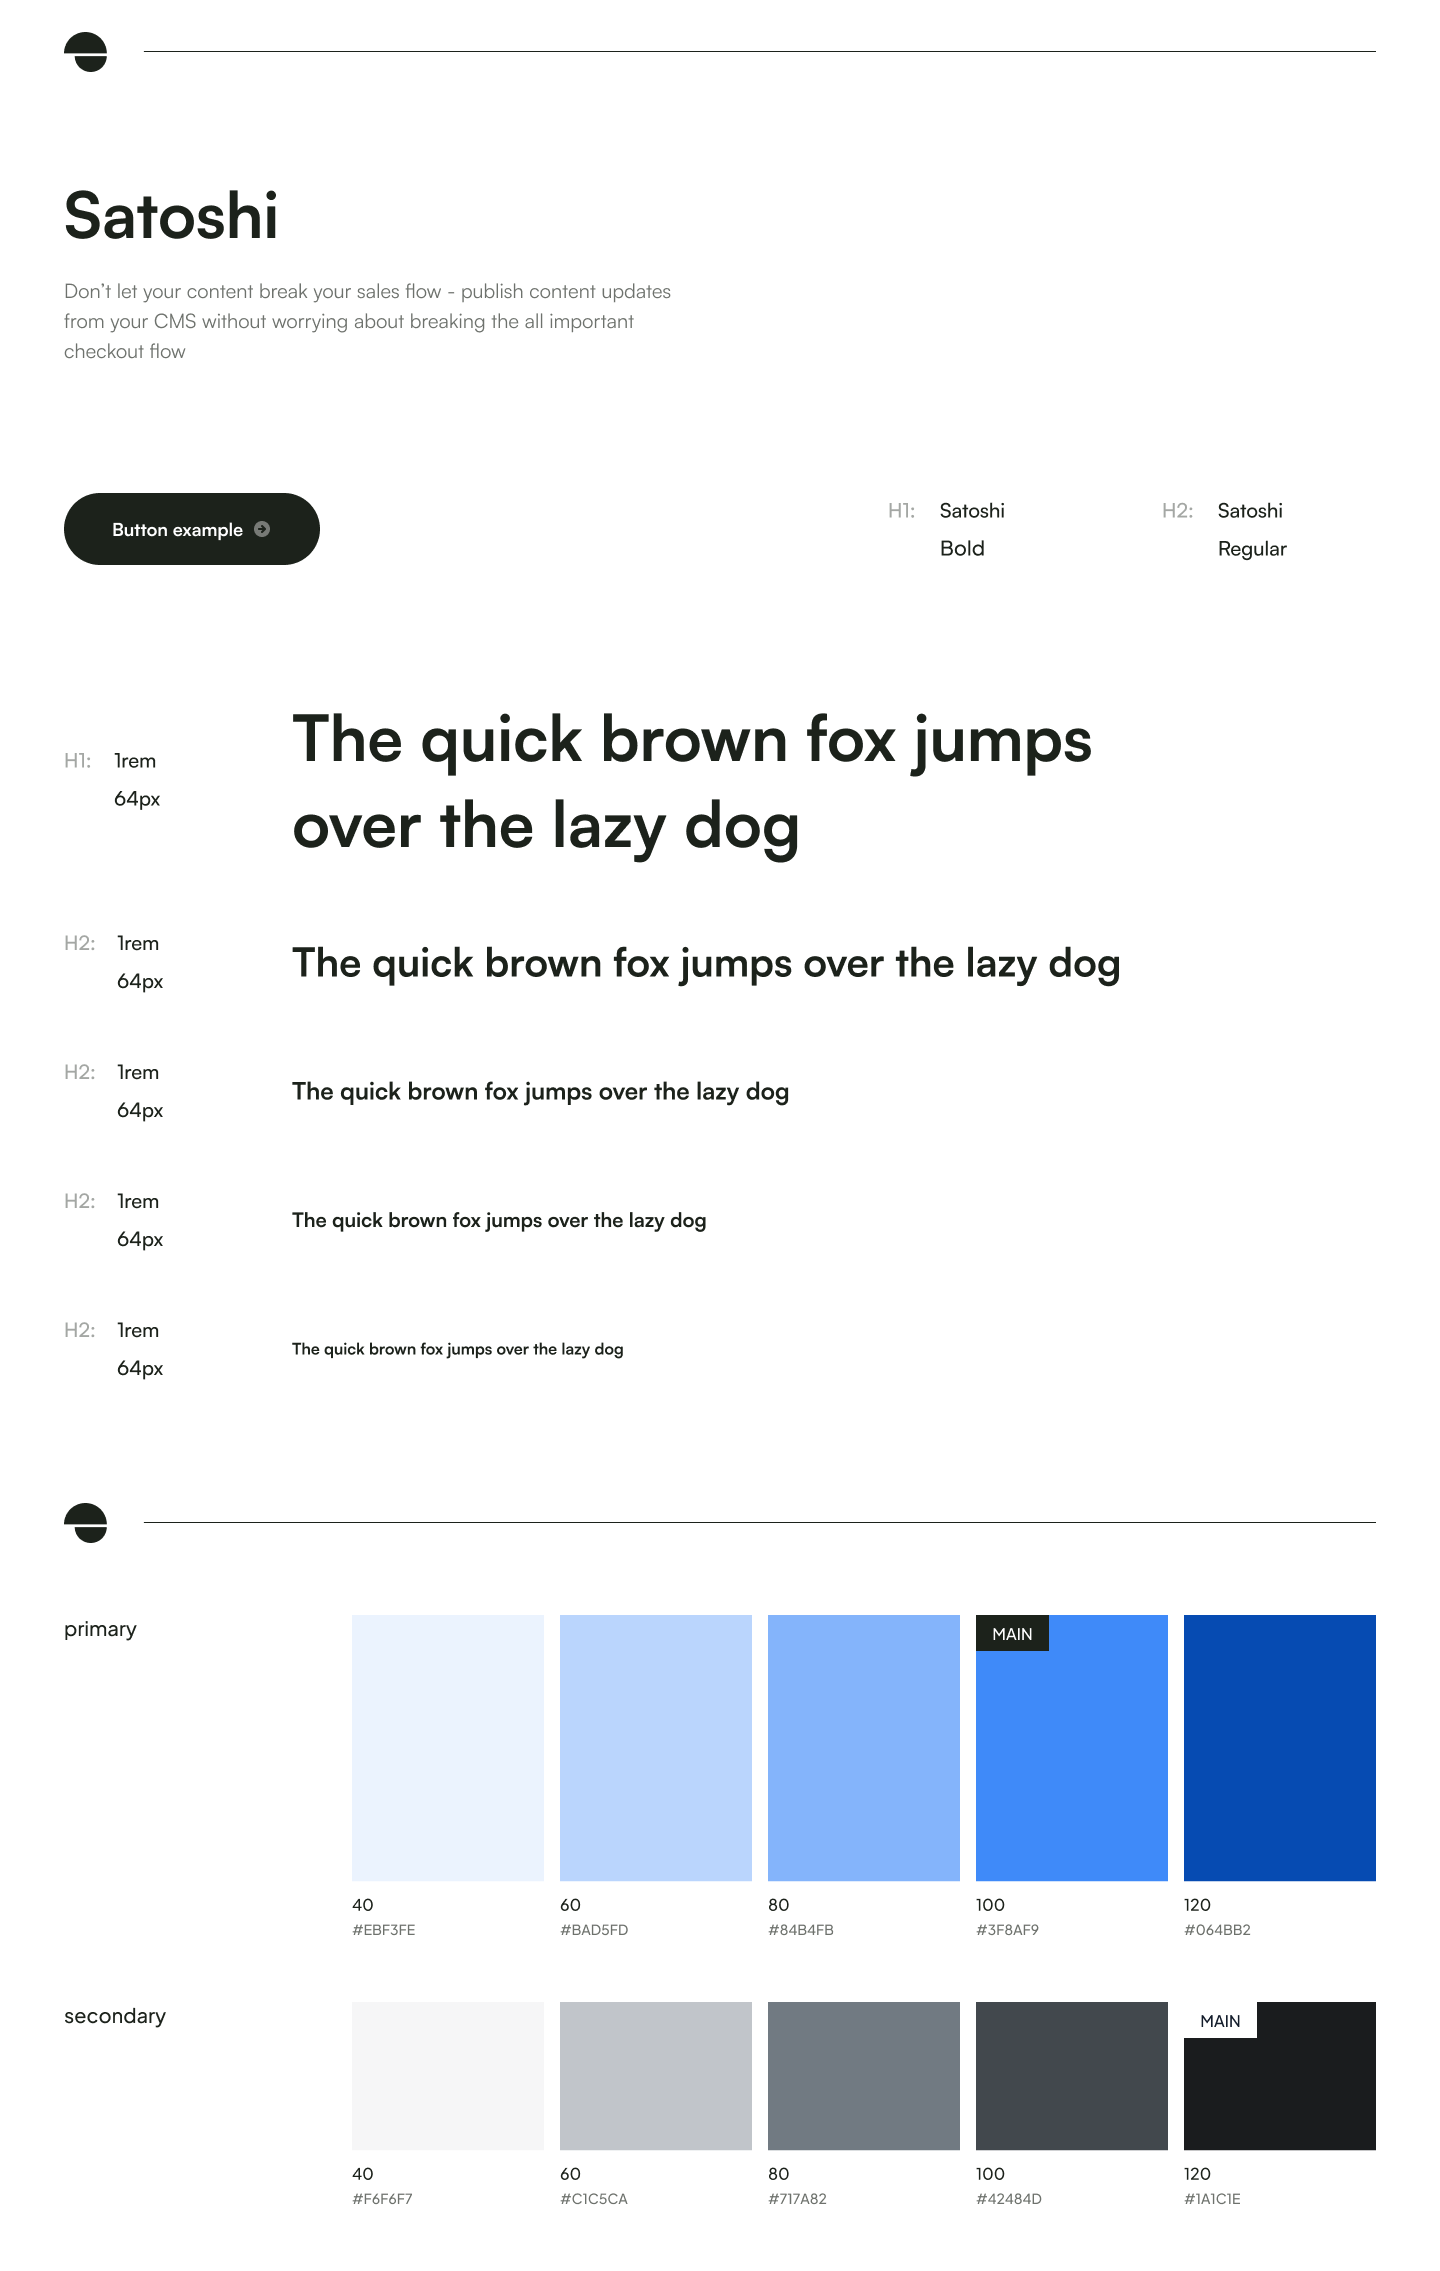 Fragments of Dodonut's design system with fonts and colors.